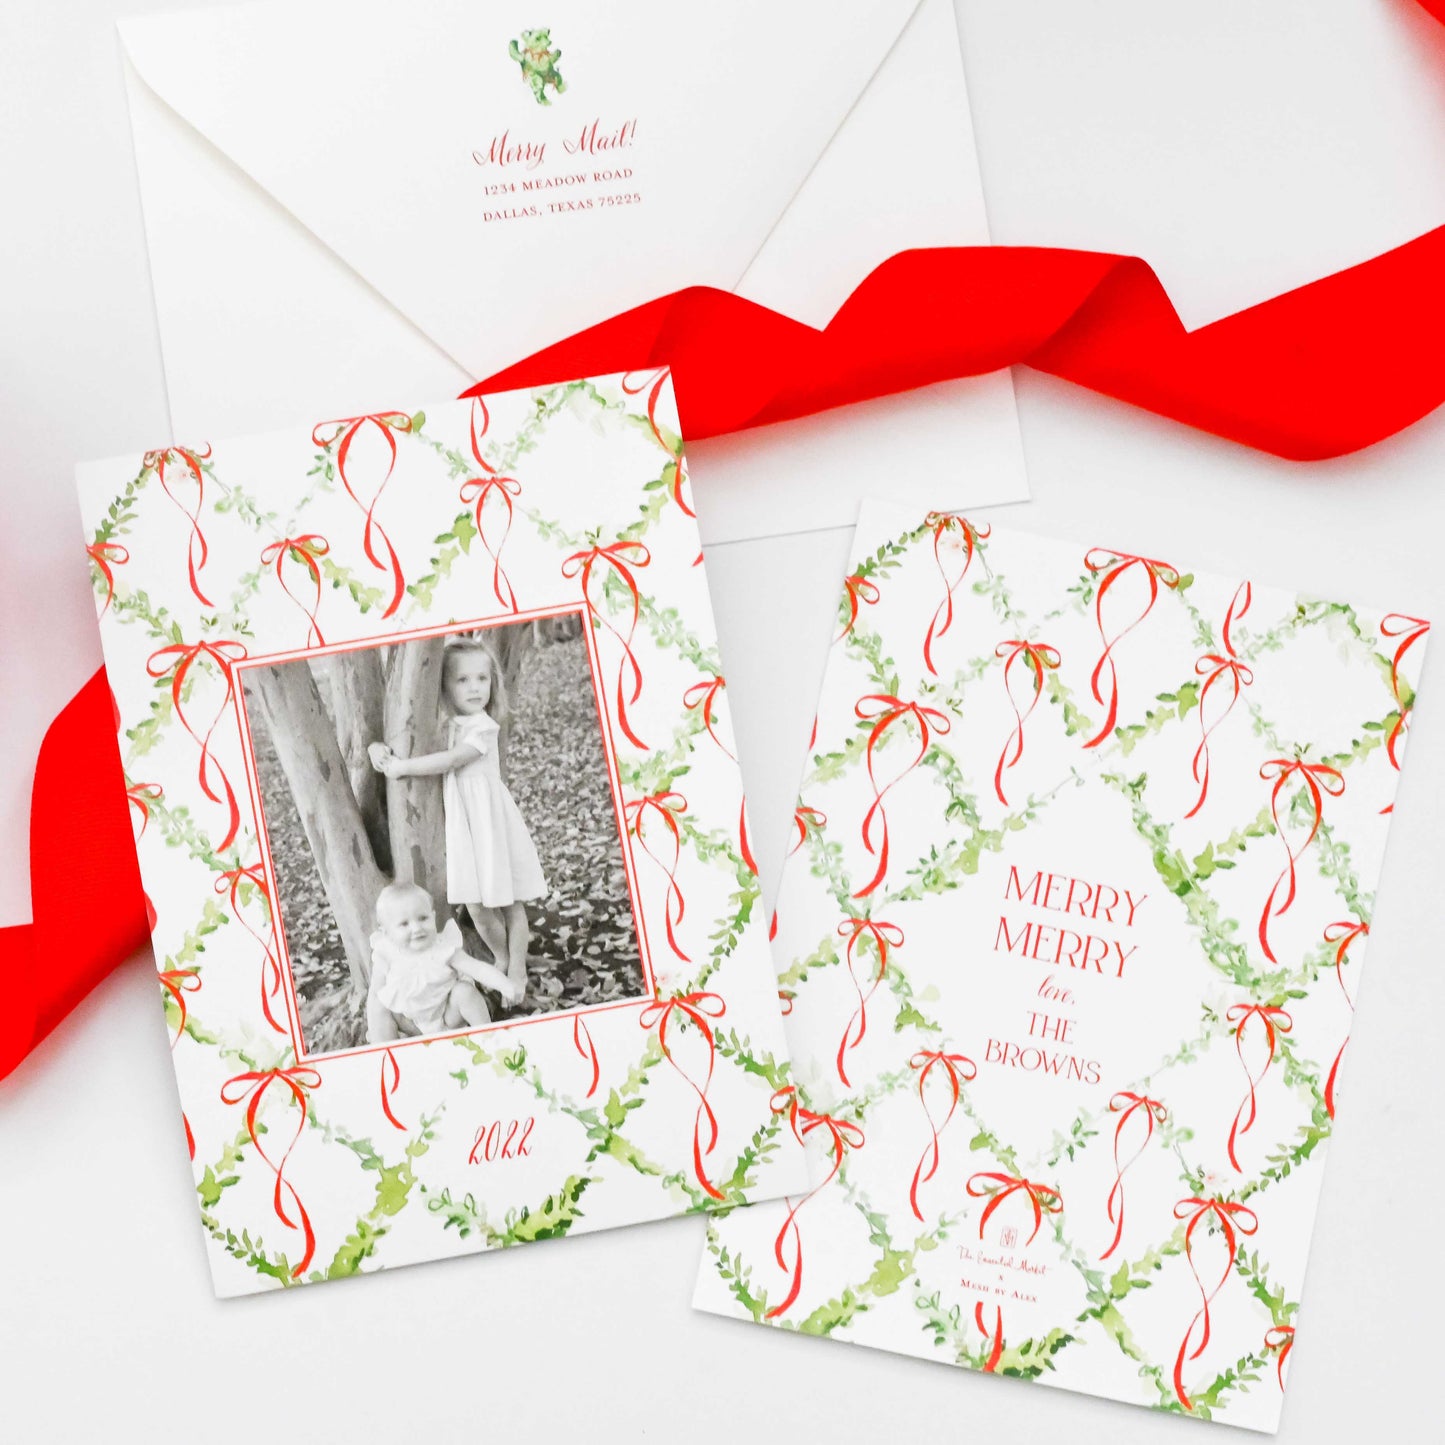 merry merry bows | holiday card | mesh by alex